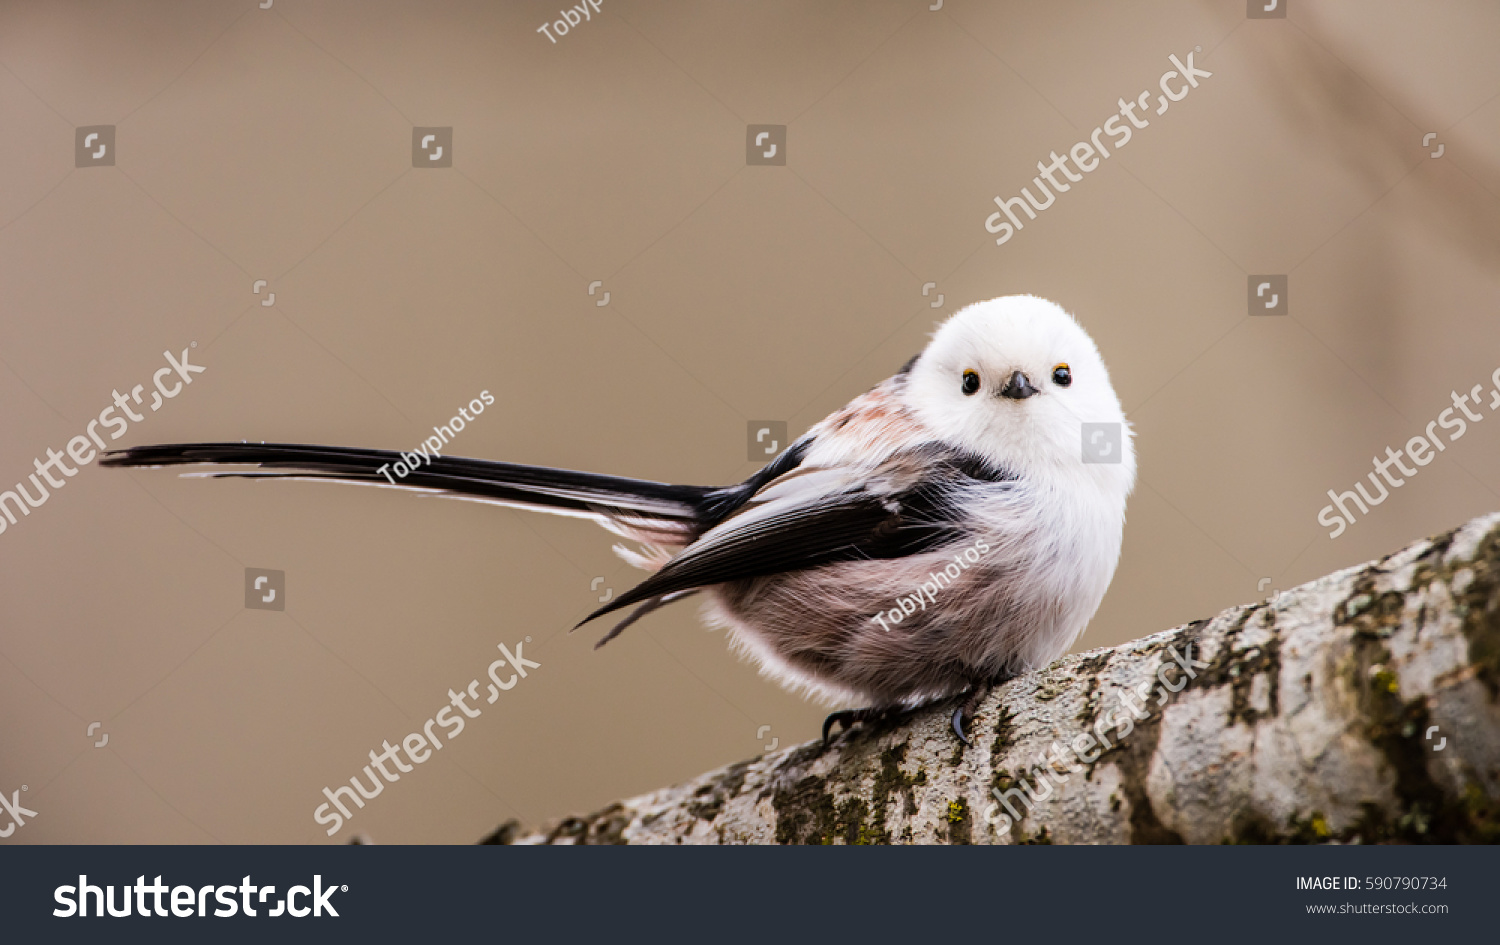 Long-tailed tit or long-tailed bushtit (Aegithalos caudatus) perching on an oak branch with a defocused background #590790734